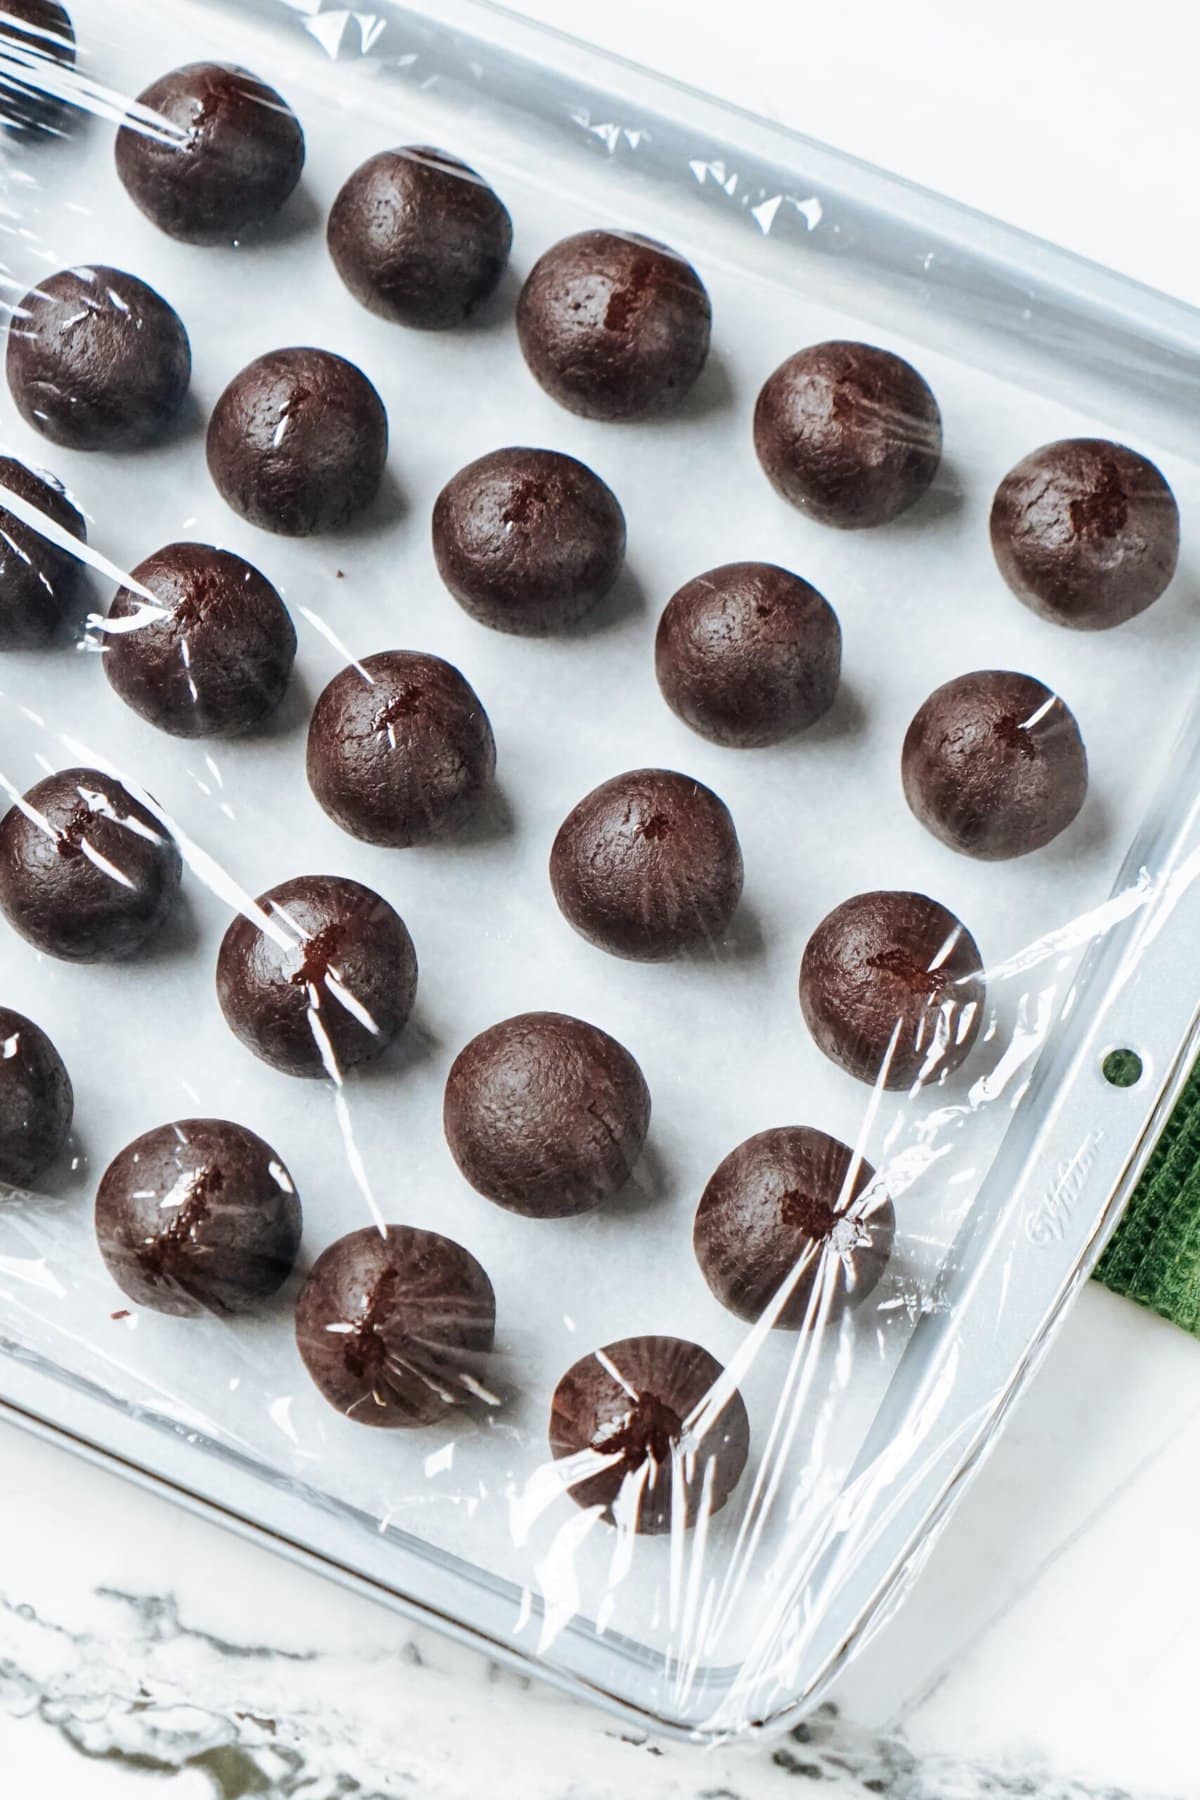 Chocolate truffles on a baking sheet covered in plastic wrap.